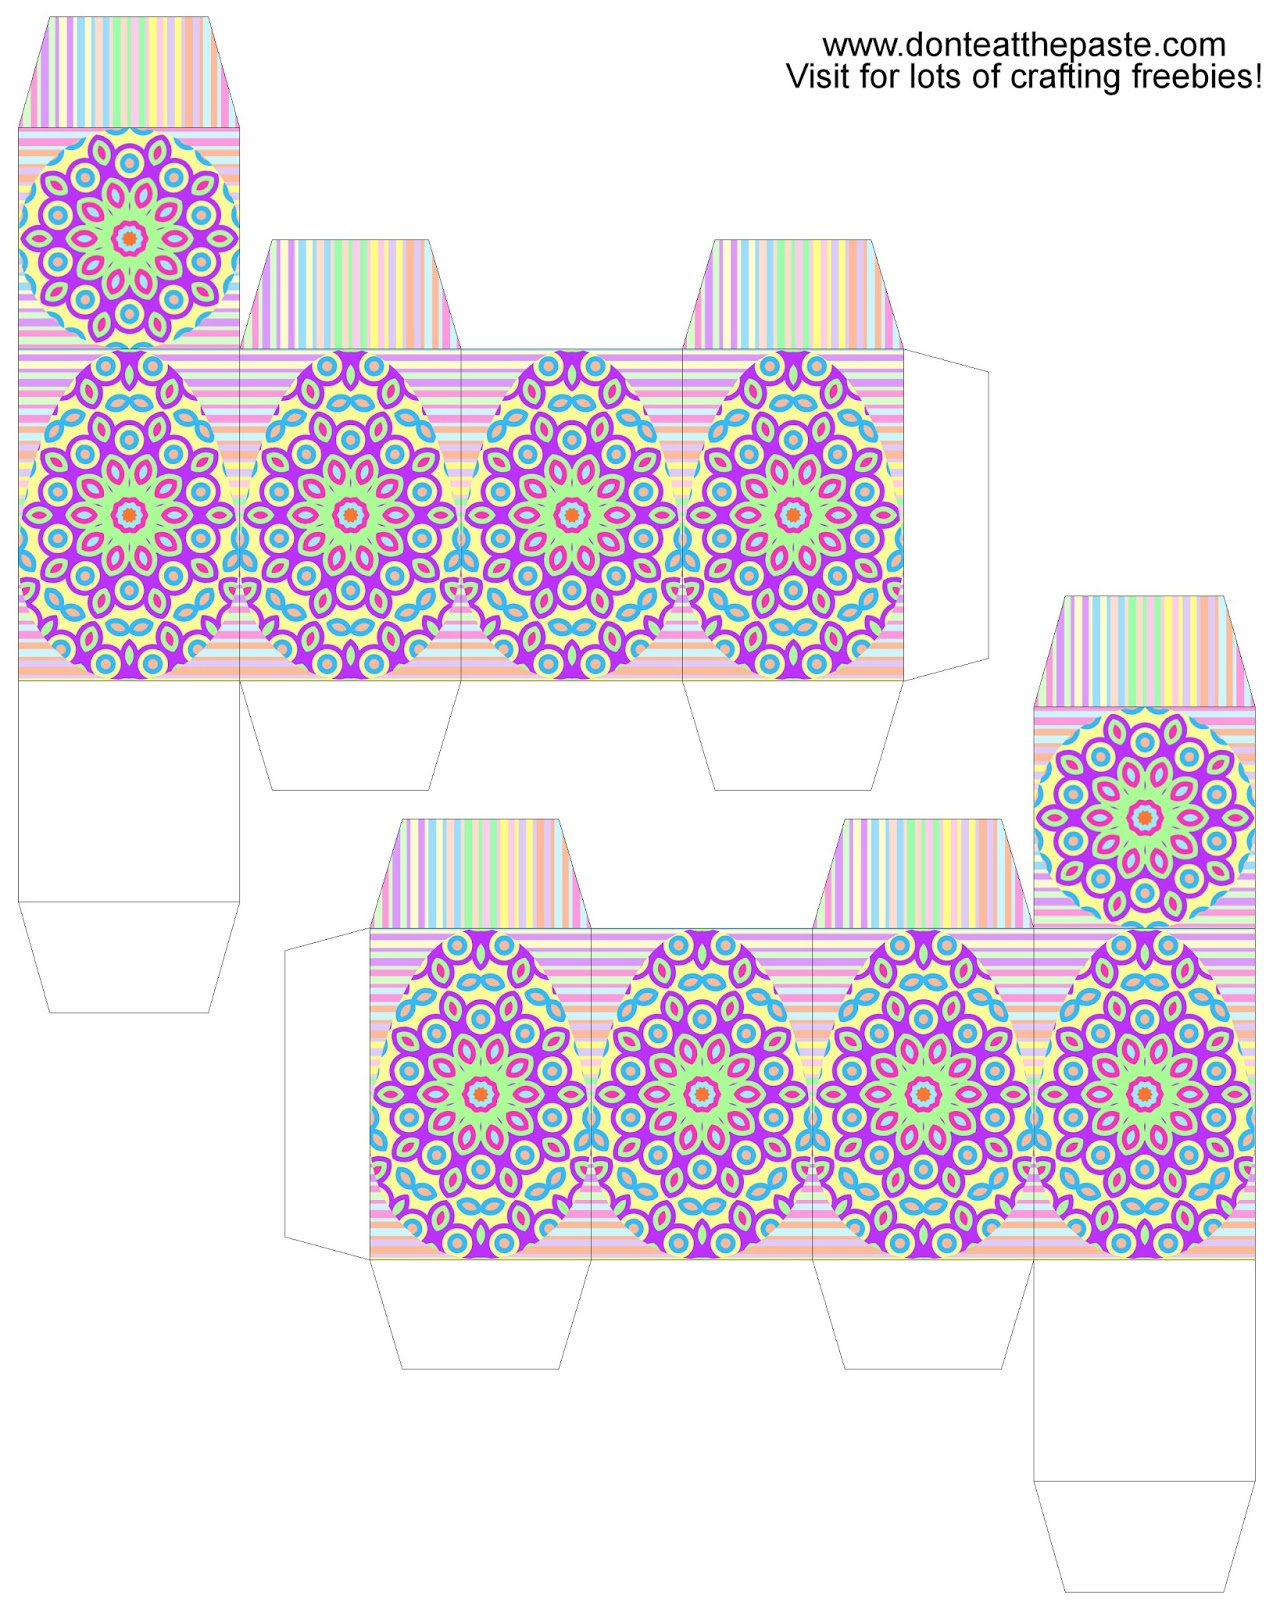 Printable creme egg box in bright pastels- boxes